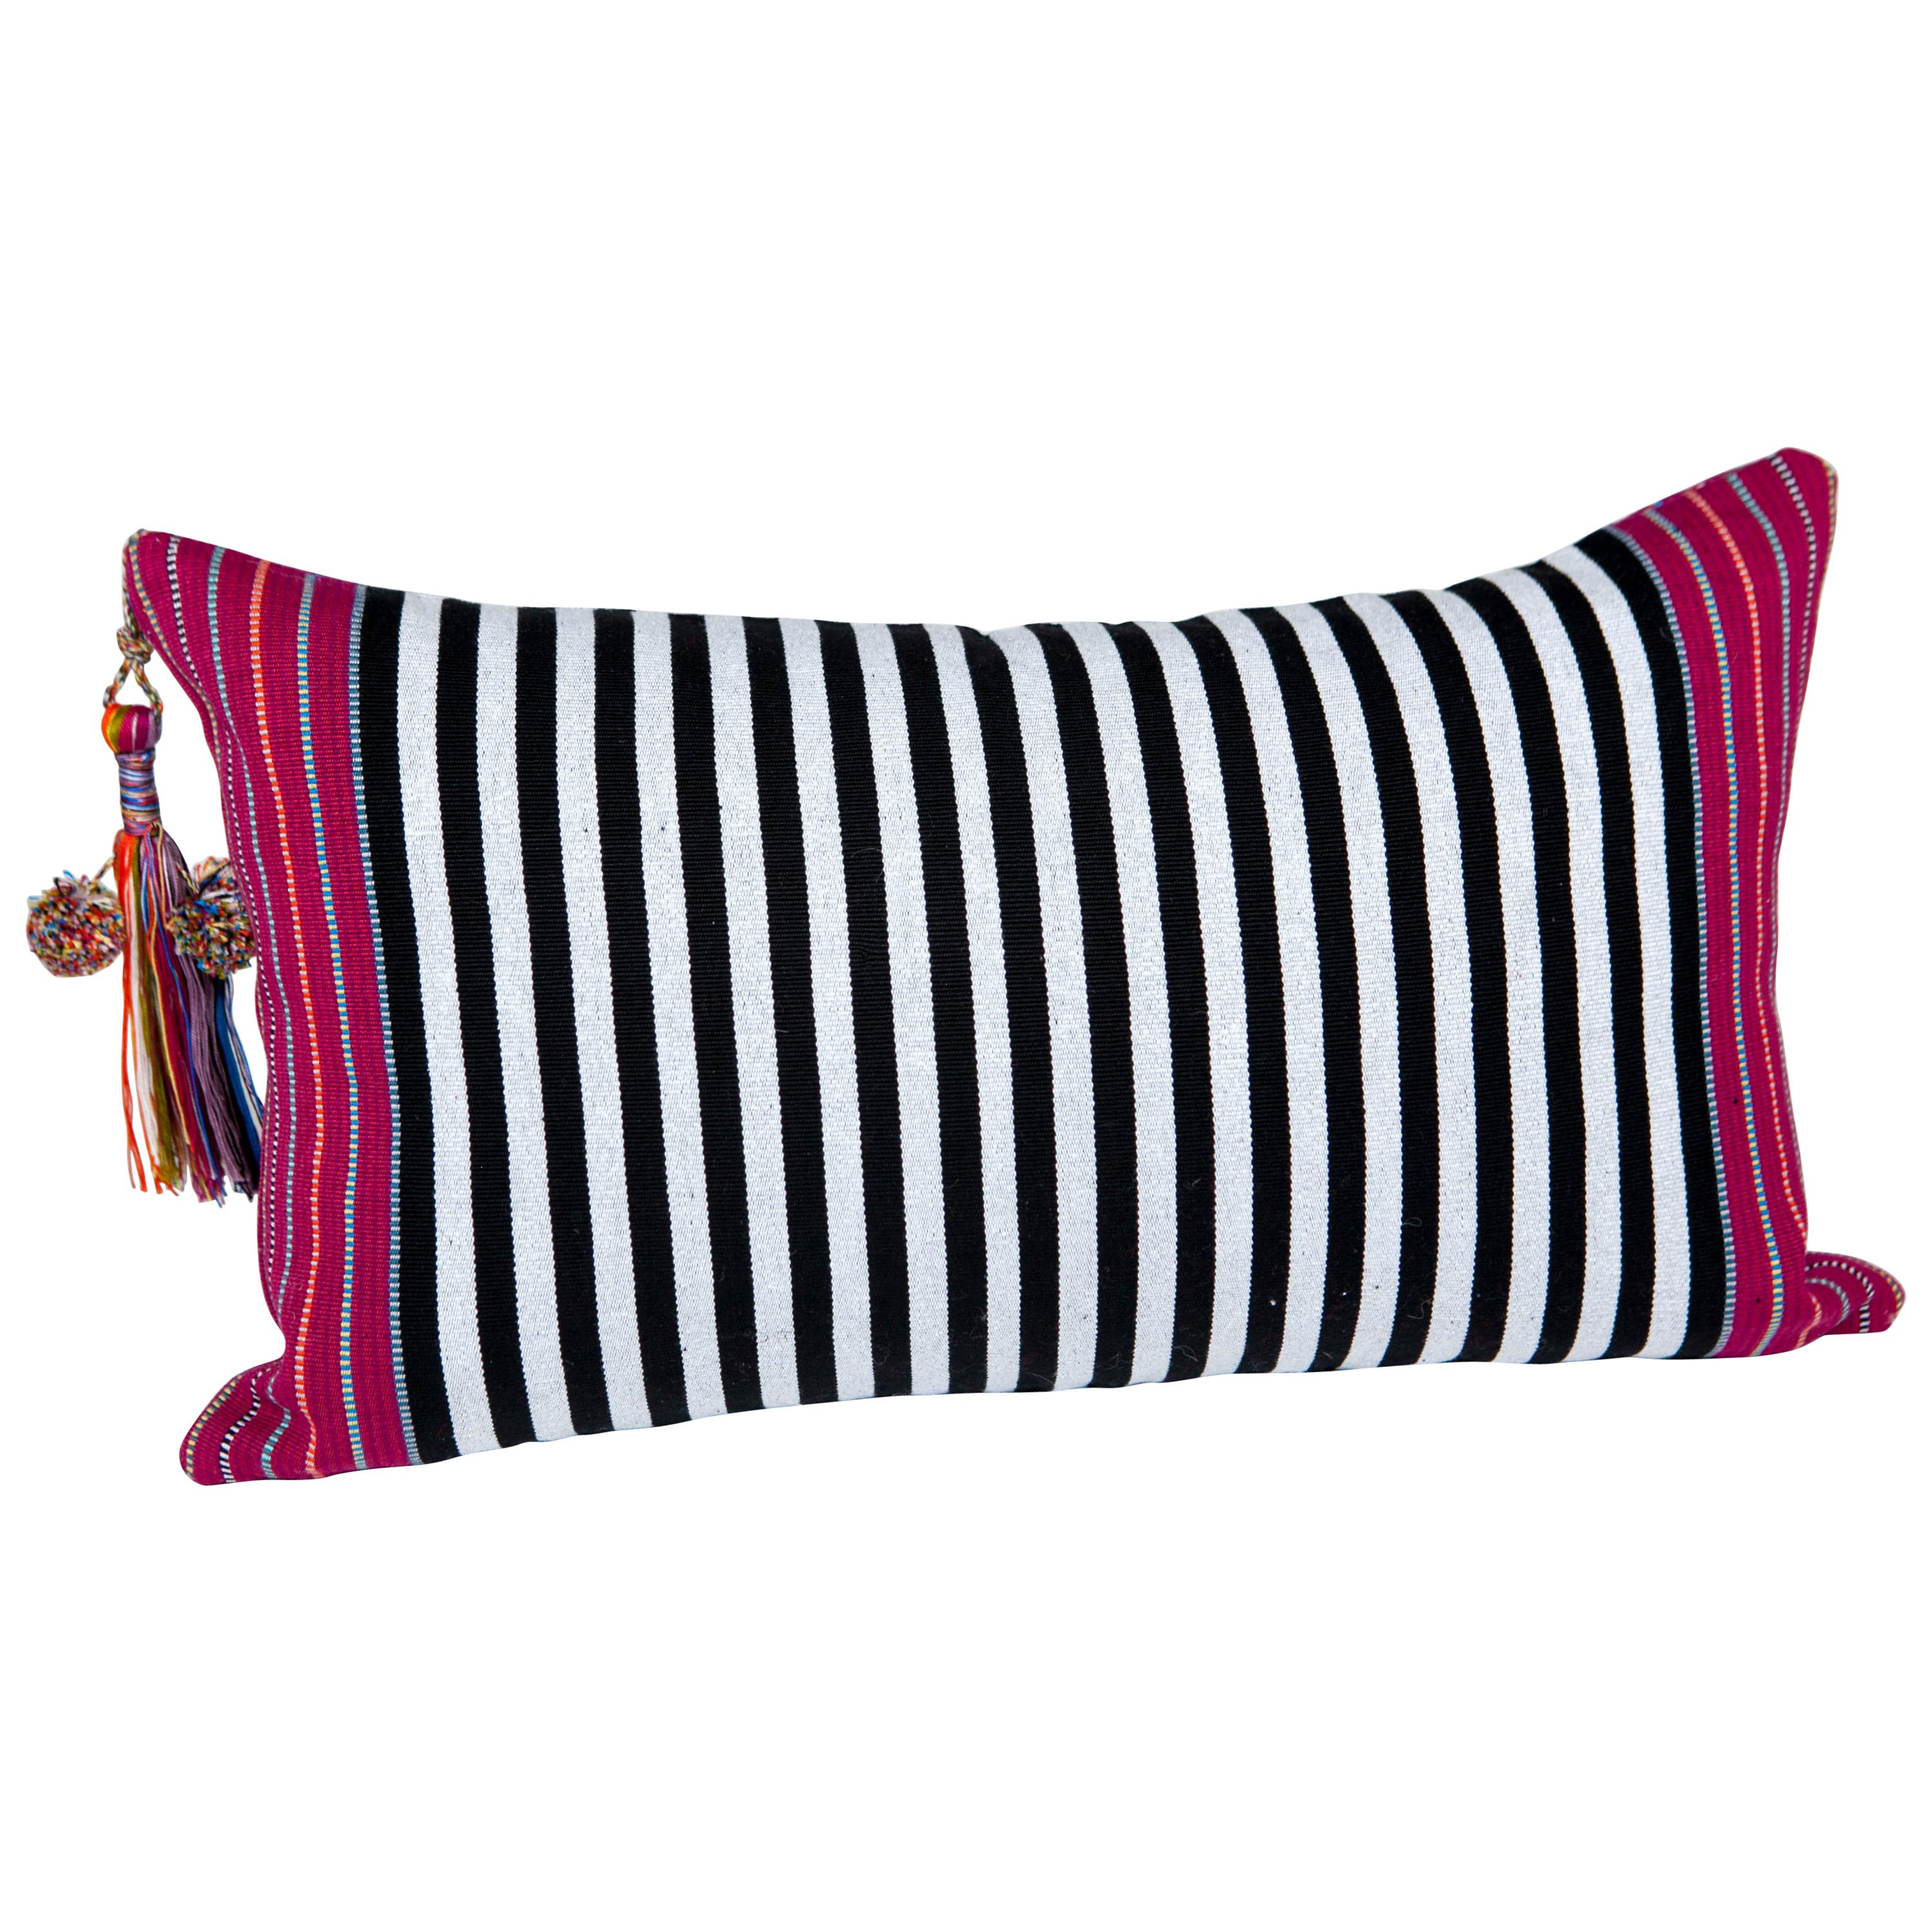 Handwoven Fine Cotton Small Pillow Black Stripes with Red Trim & Tassel in Stock